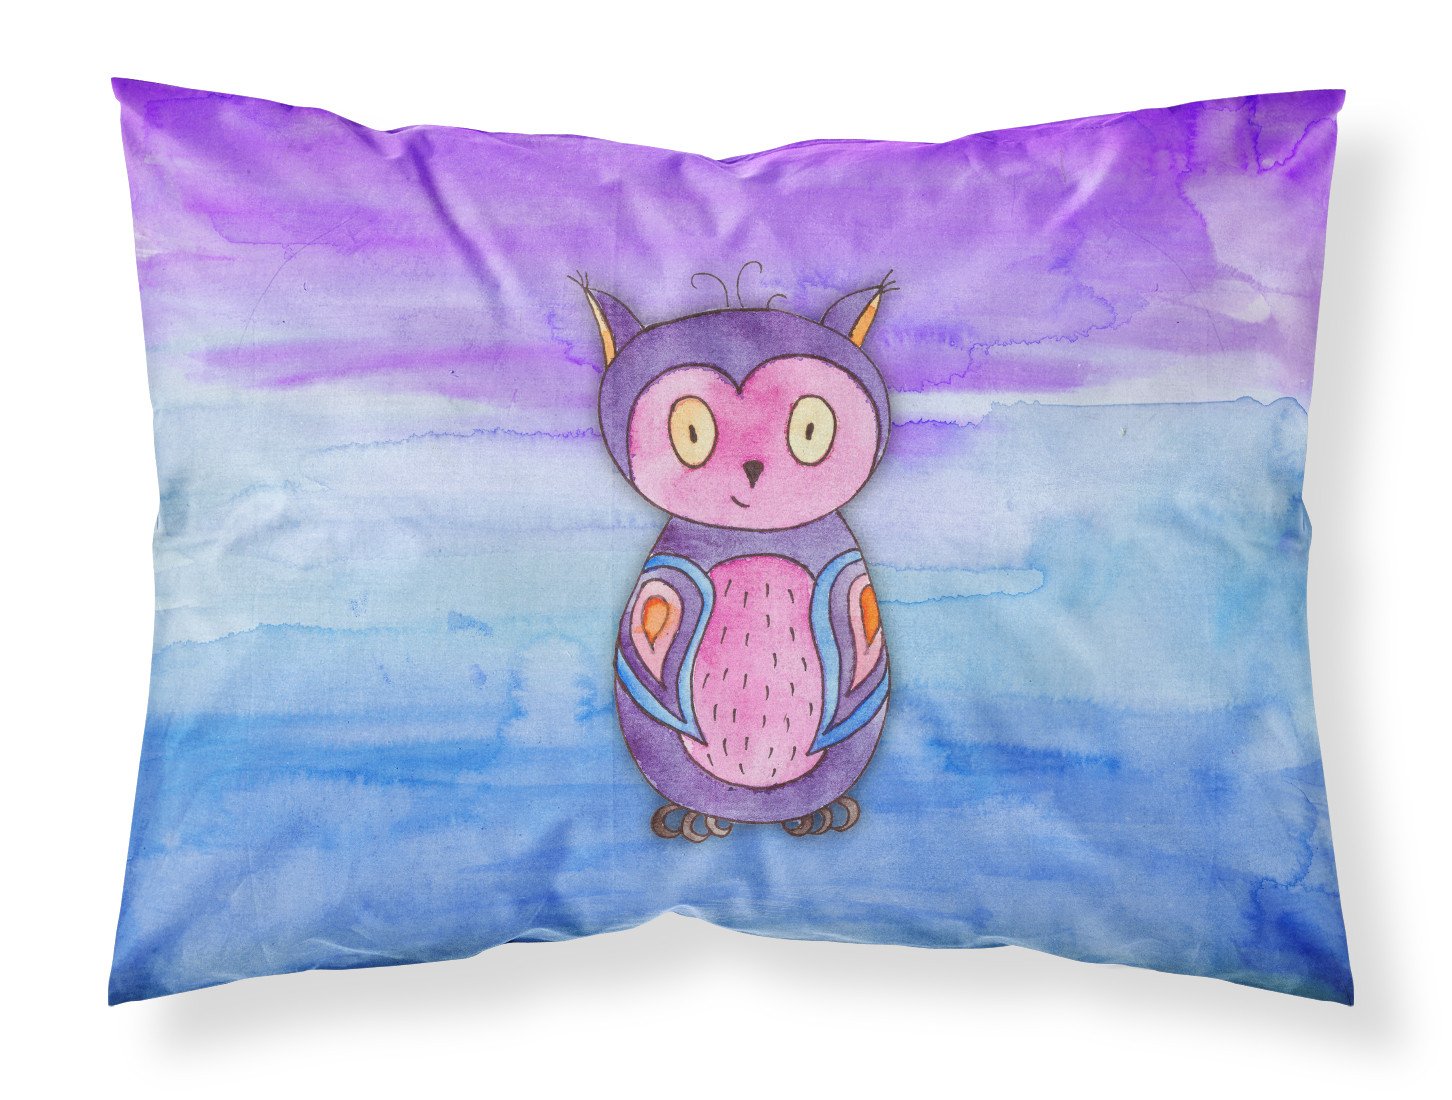 Pink and Purple Owl Watercolor Fabric Standard Pillowcase BB7427PILLOWCASE by Caroline's Treasures